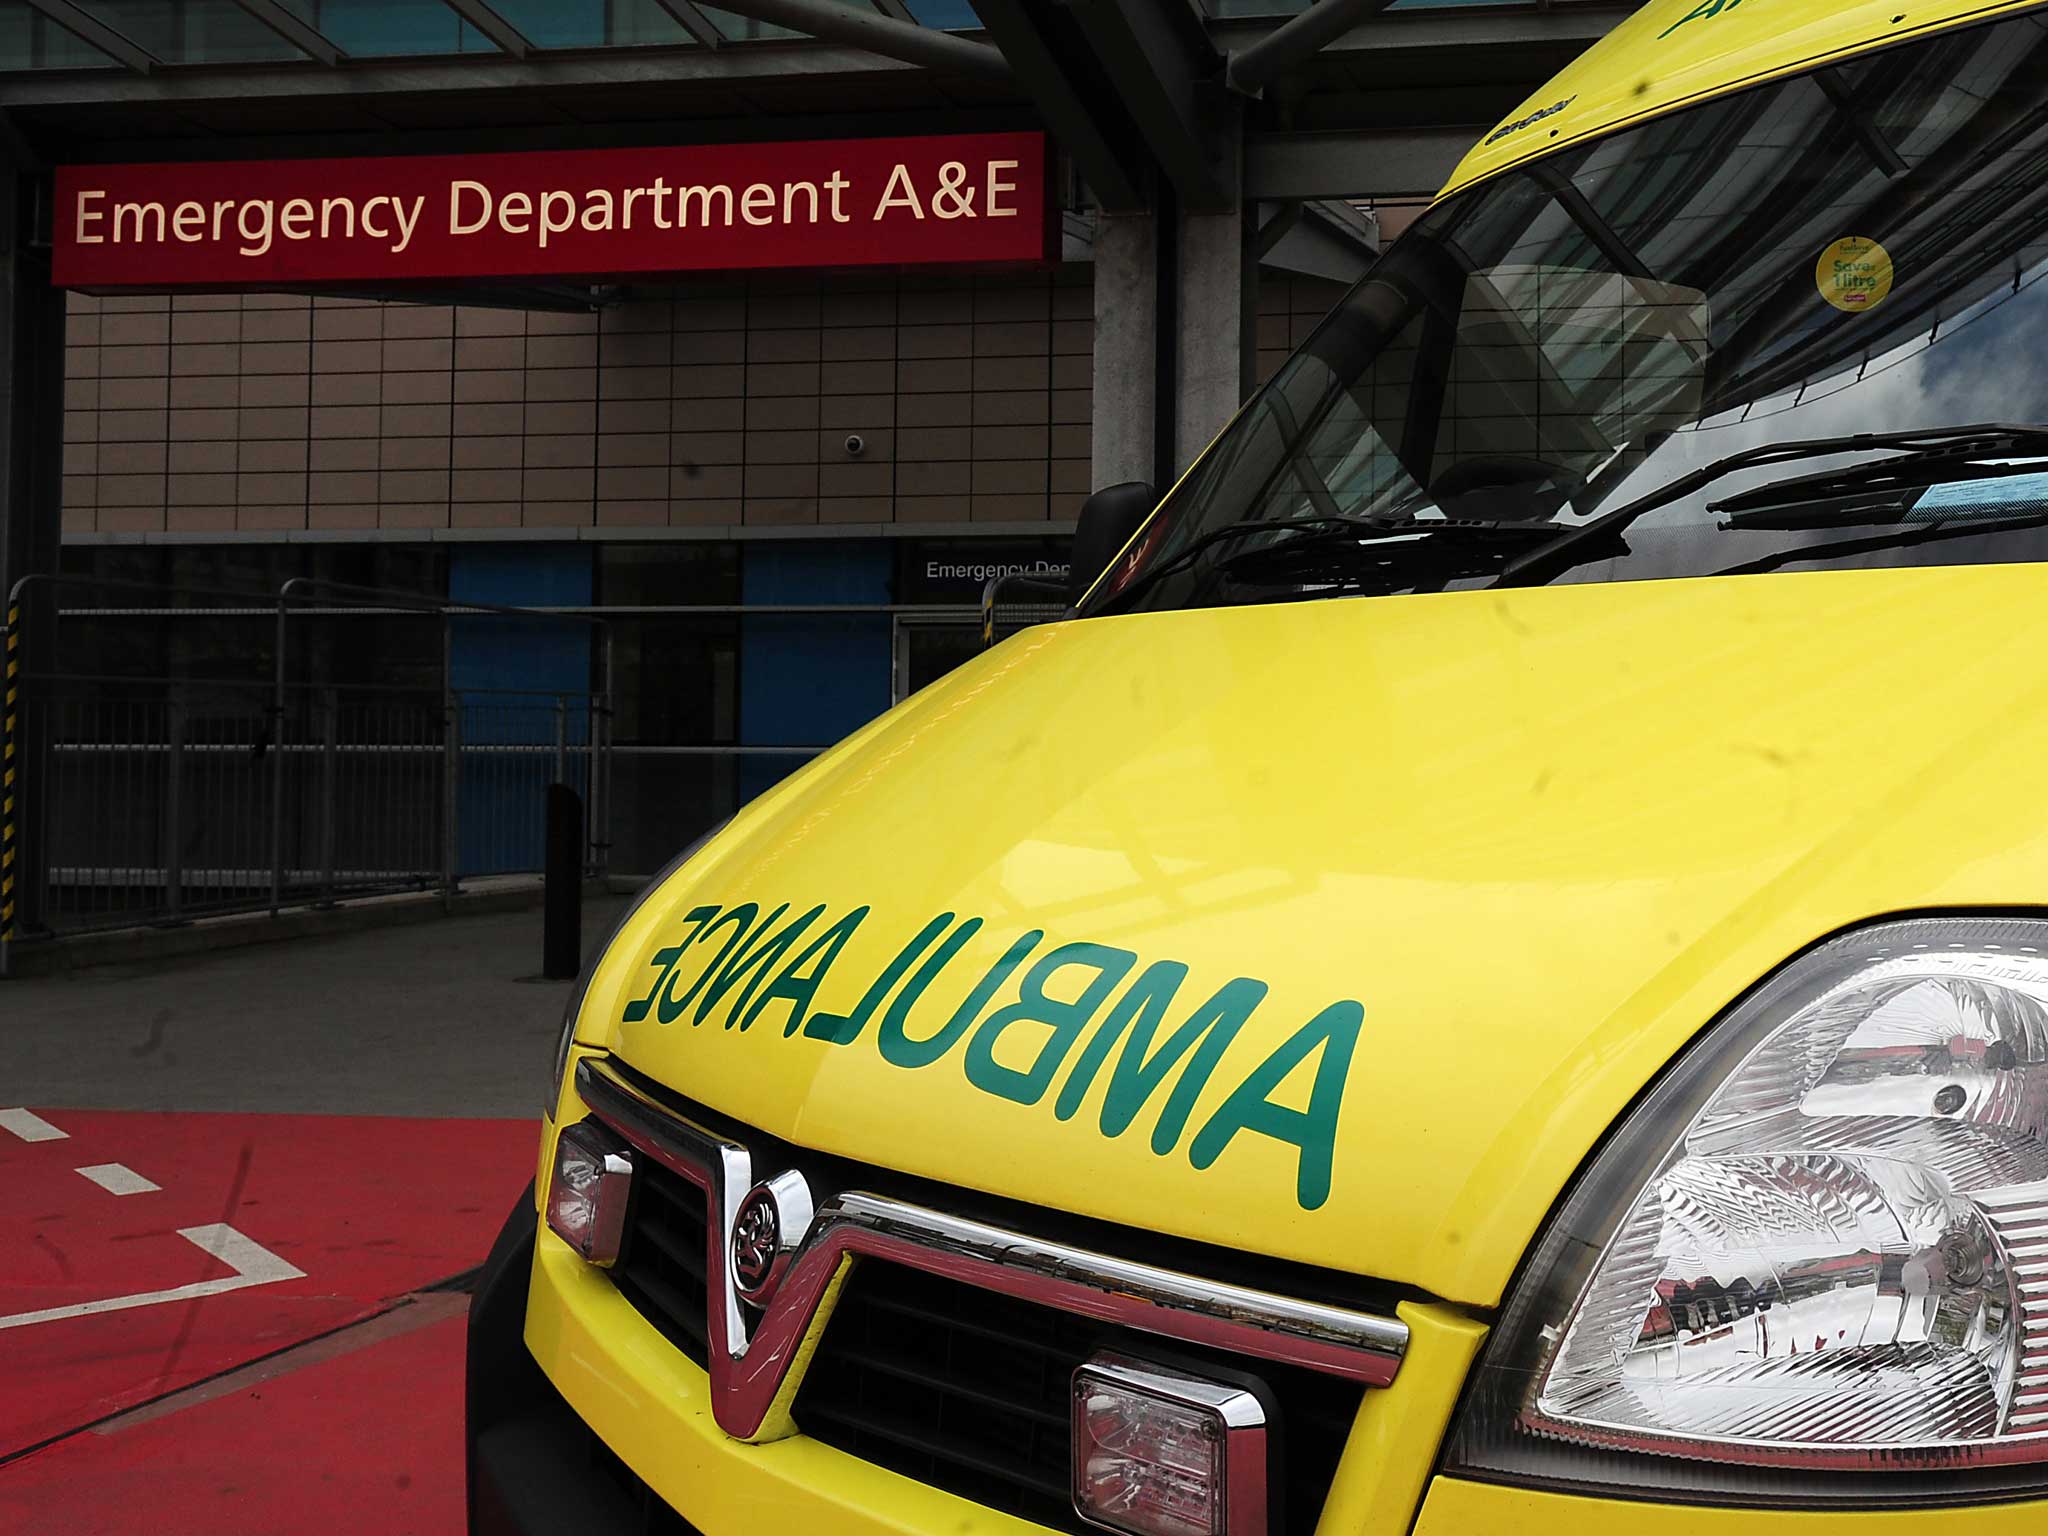 An entire A&E hospital ward was evacuated by emergency fire crews on Friday evening, after a woman brought a bottle of weed killer into the unit.